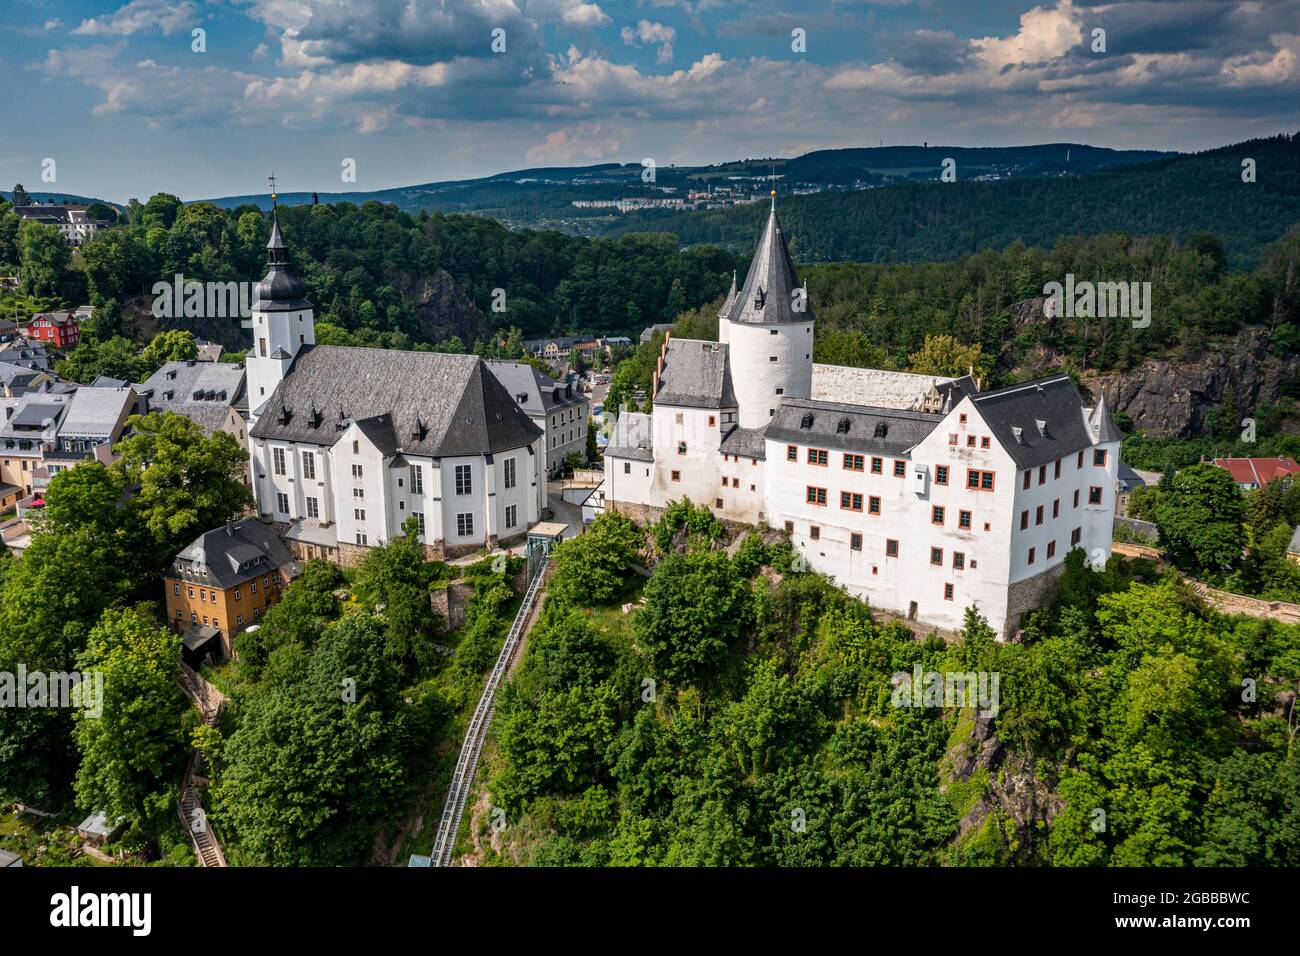 Aerial of St. Georgen Kirche and Palace, town of Schwarzenberg, Ore Mountains, UNESCO World Heritage Site, Saxony, Germany, Europe Stock Photo